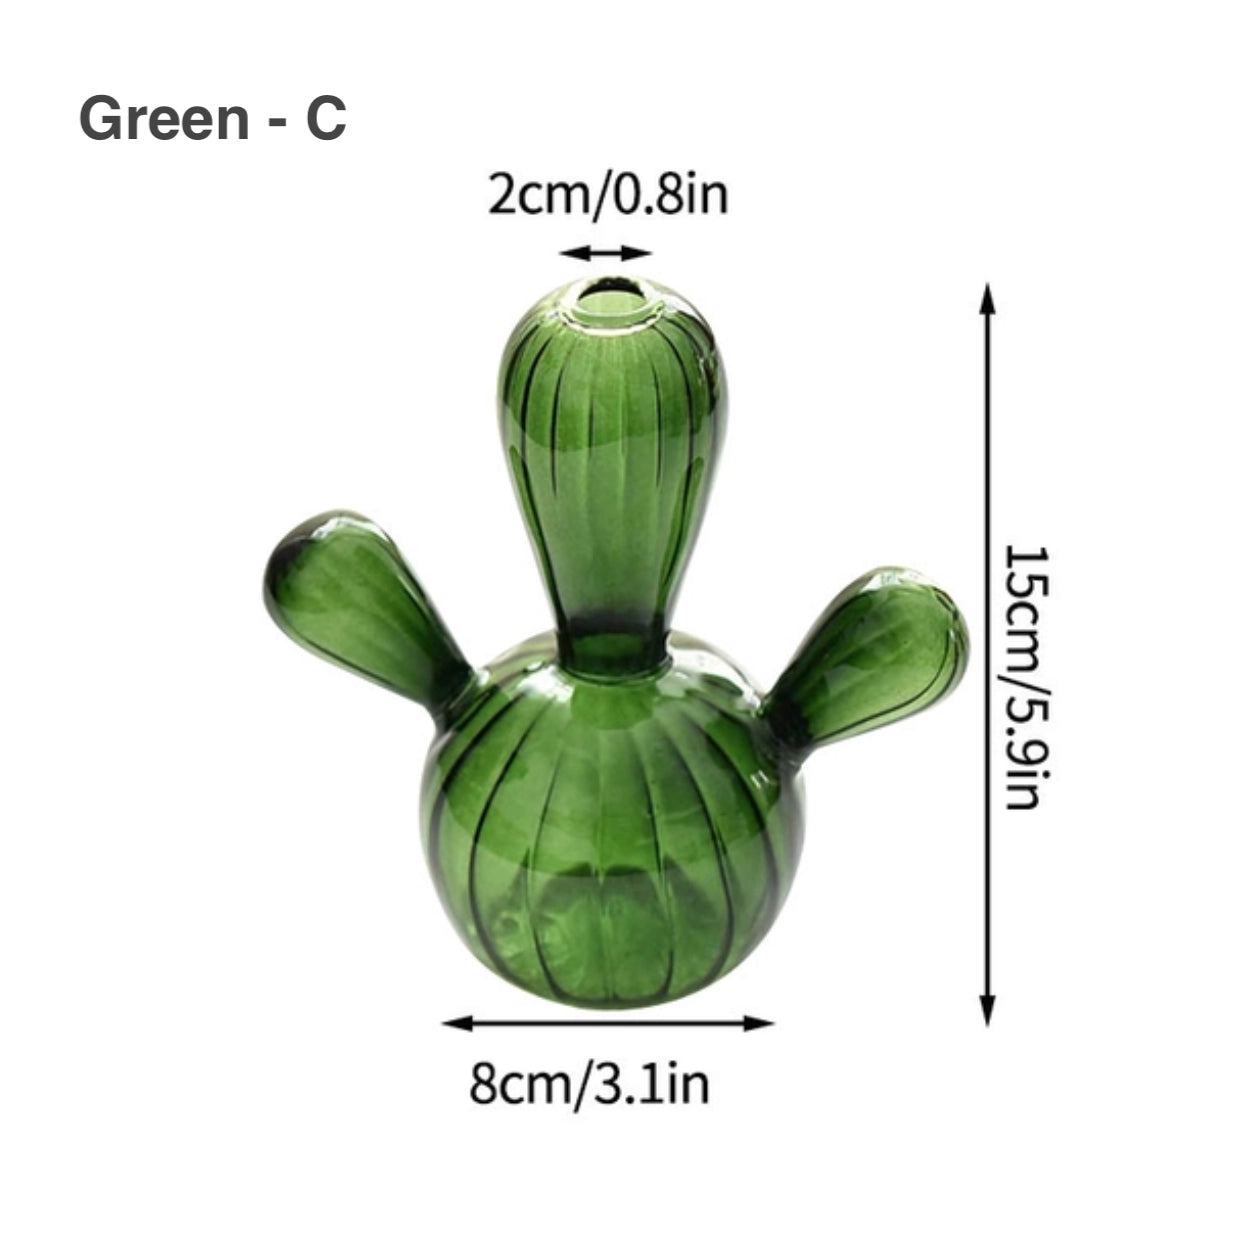 The short cactus green glass hydroponic vase measurement diagram, 15cm tall and 8 cm base excluding arms